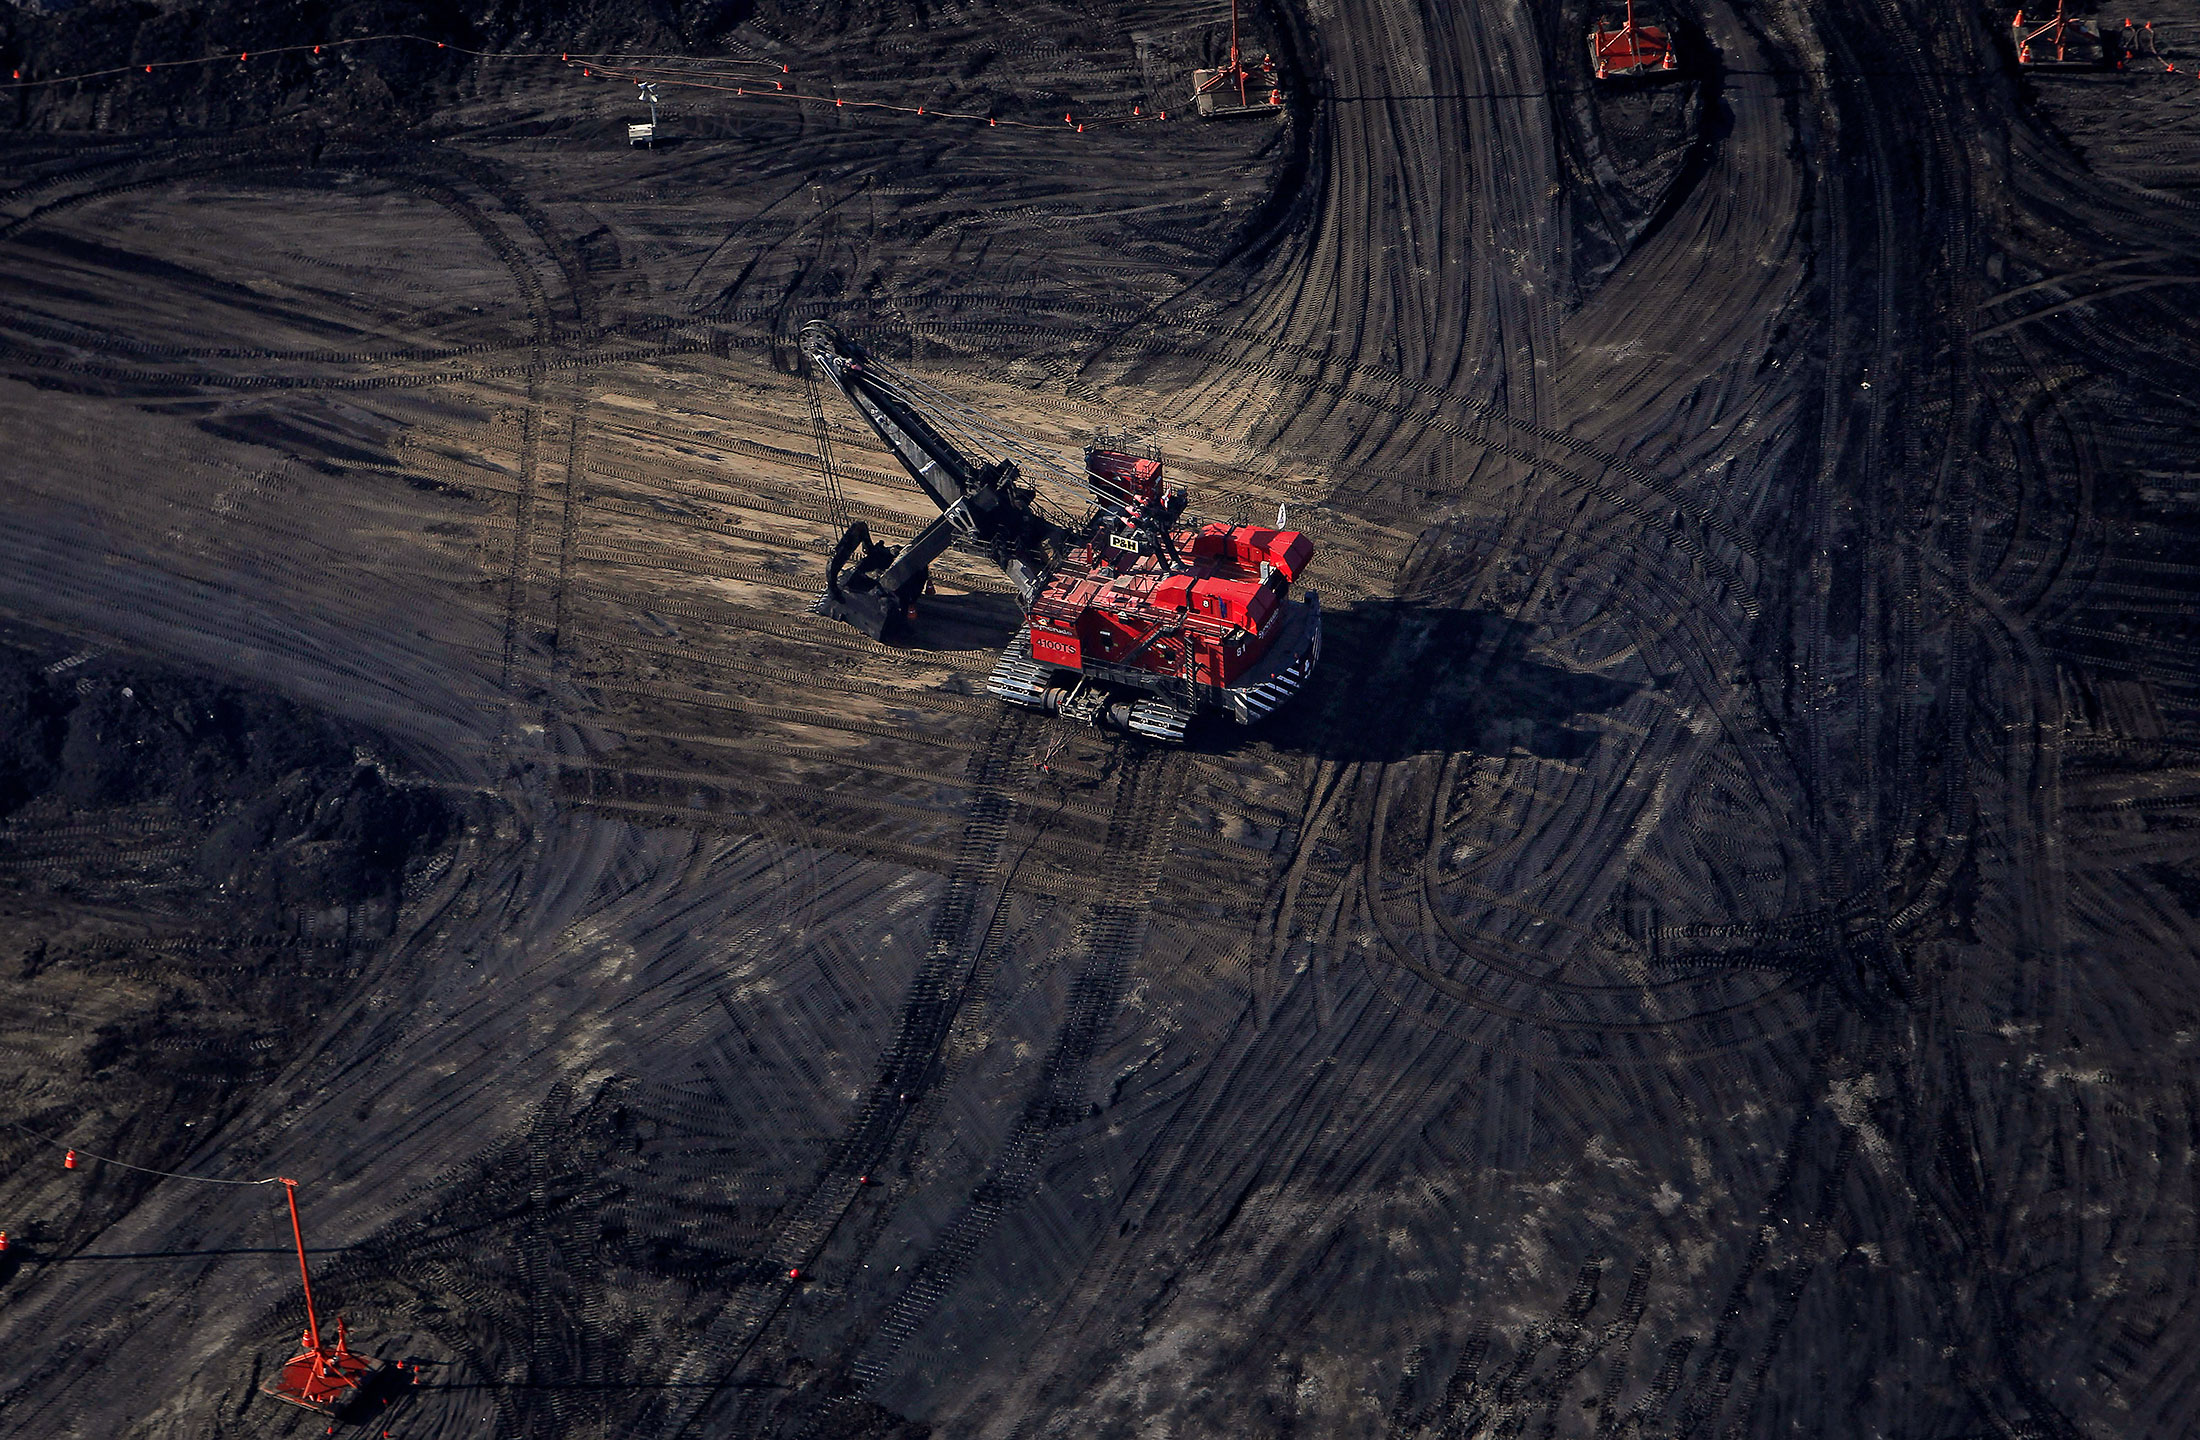 A bucket loader digs for oil sands at a mine in this aerial photograph taken near Fort McMurray, Alberta, Canada, on June 4, 2015.
